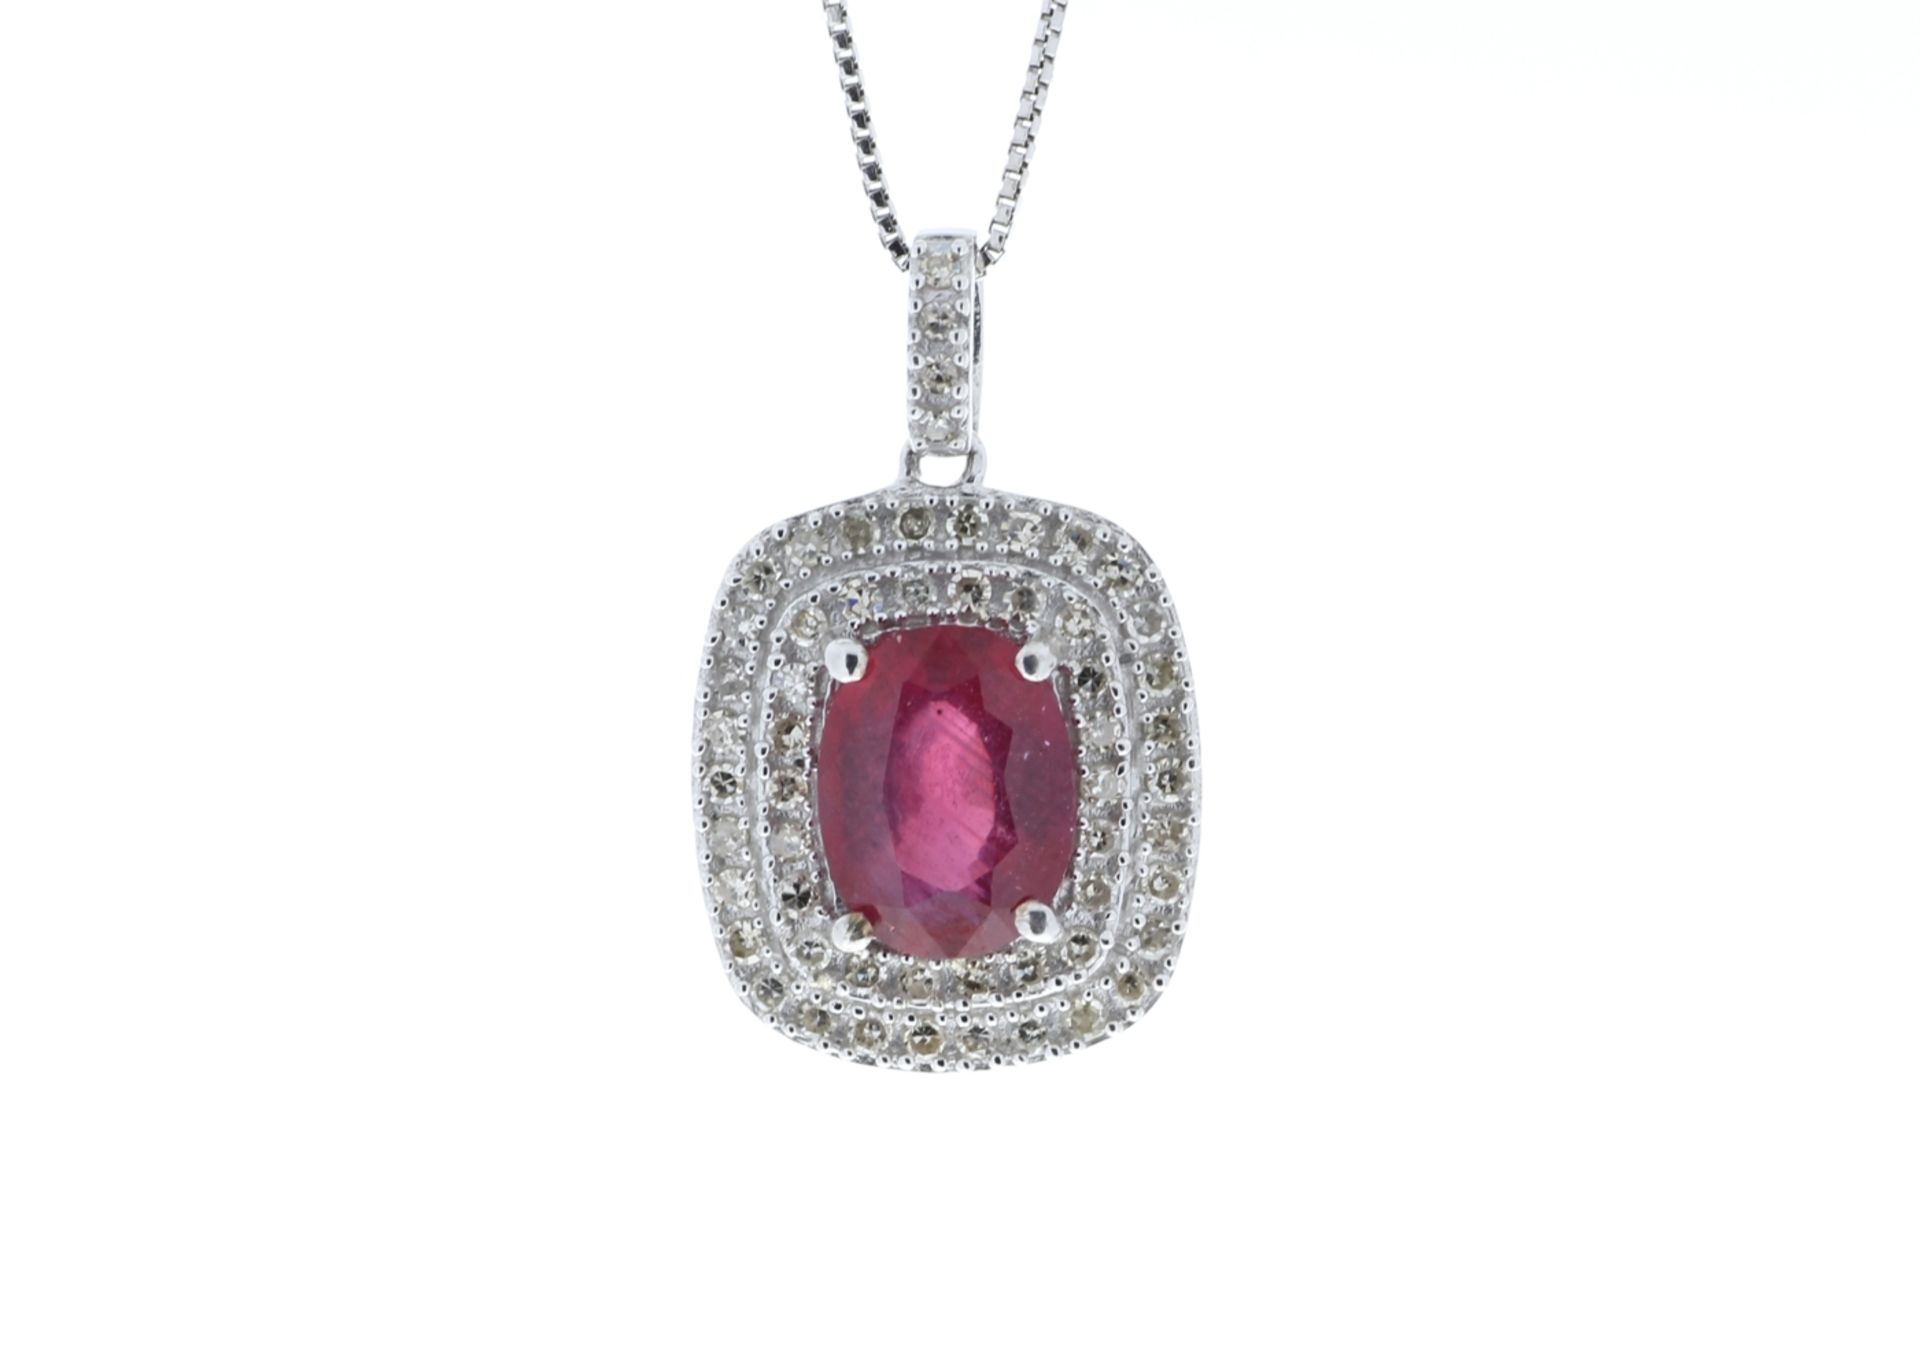 9ct White Gold Oval Ruby And Diamond Cluster Pendant (R1.54) 0.28 Carats - Valued By GIE £2,710.00 - - Image 5 of 6